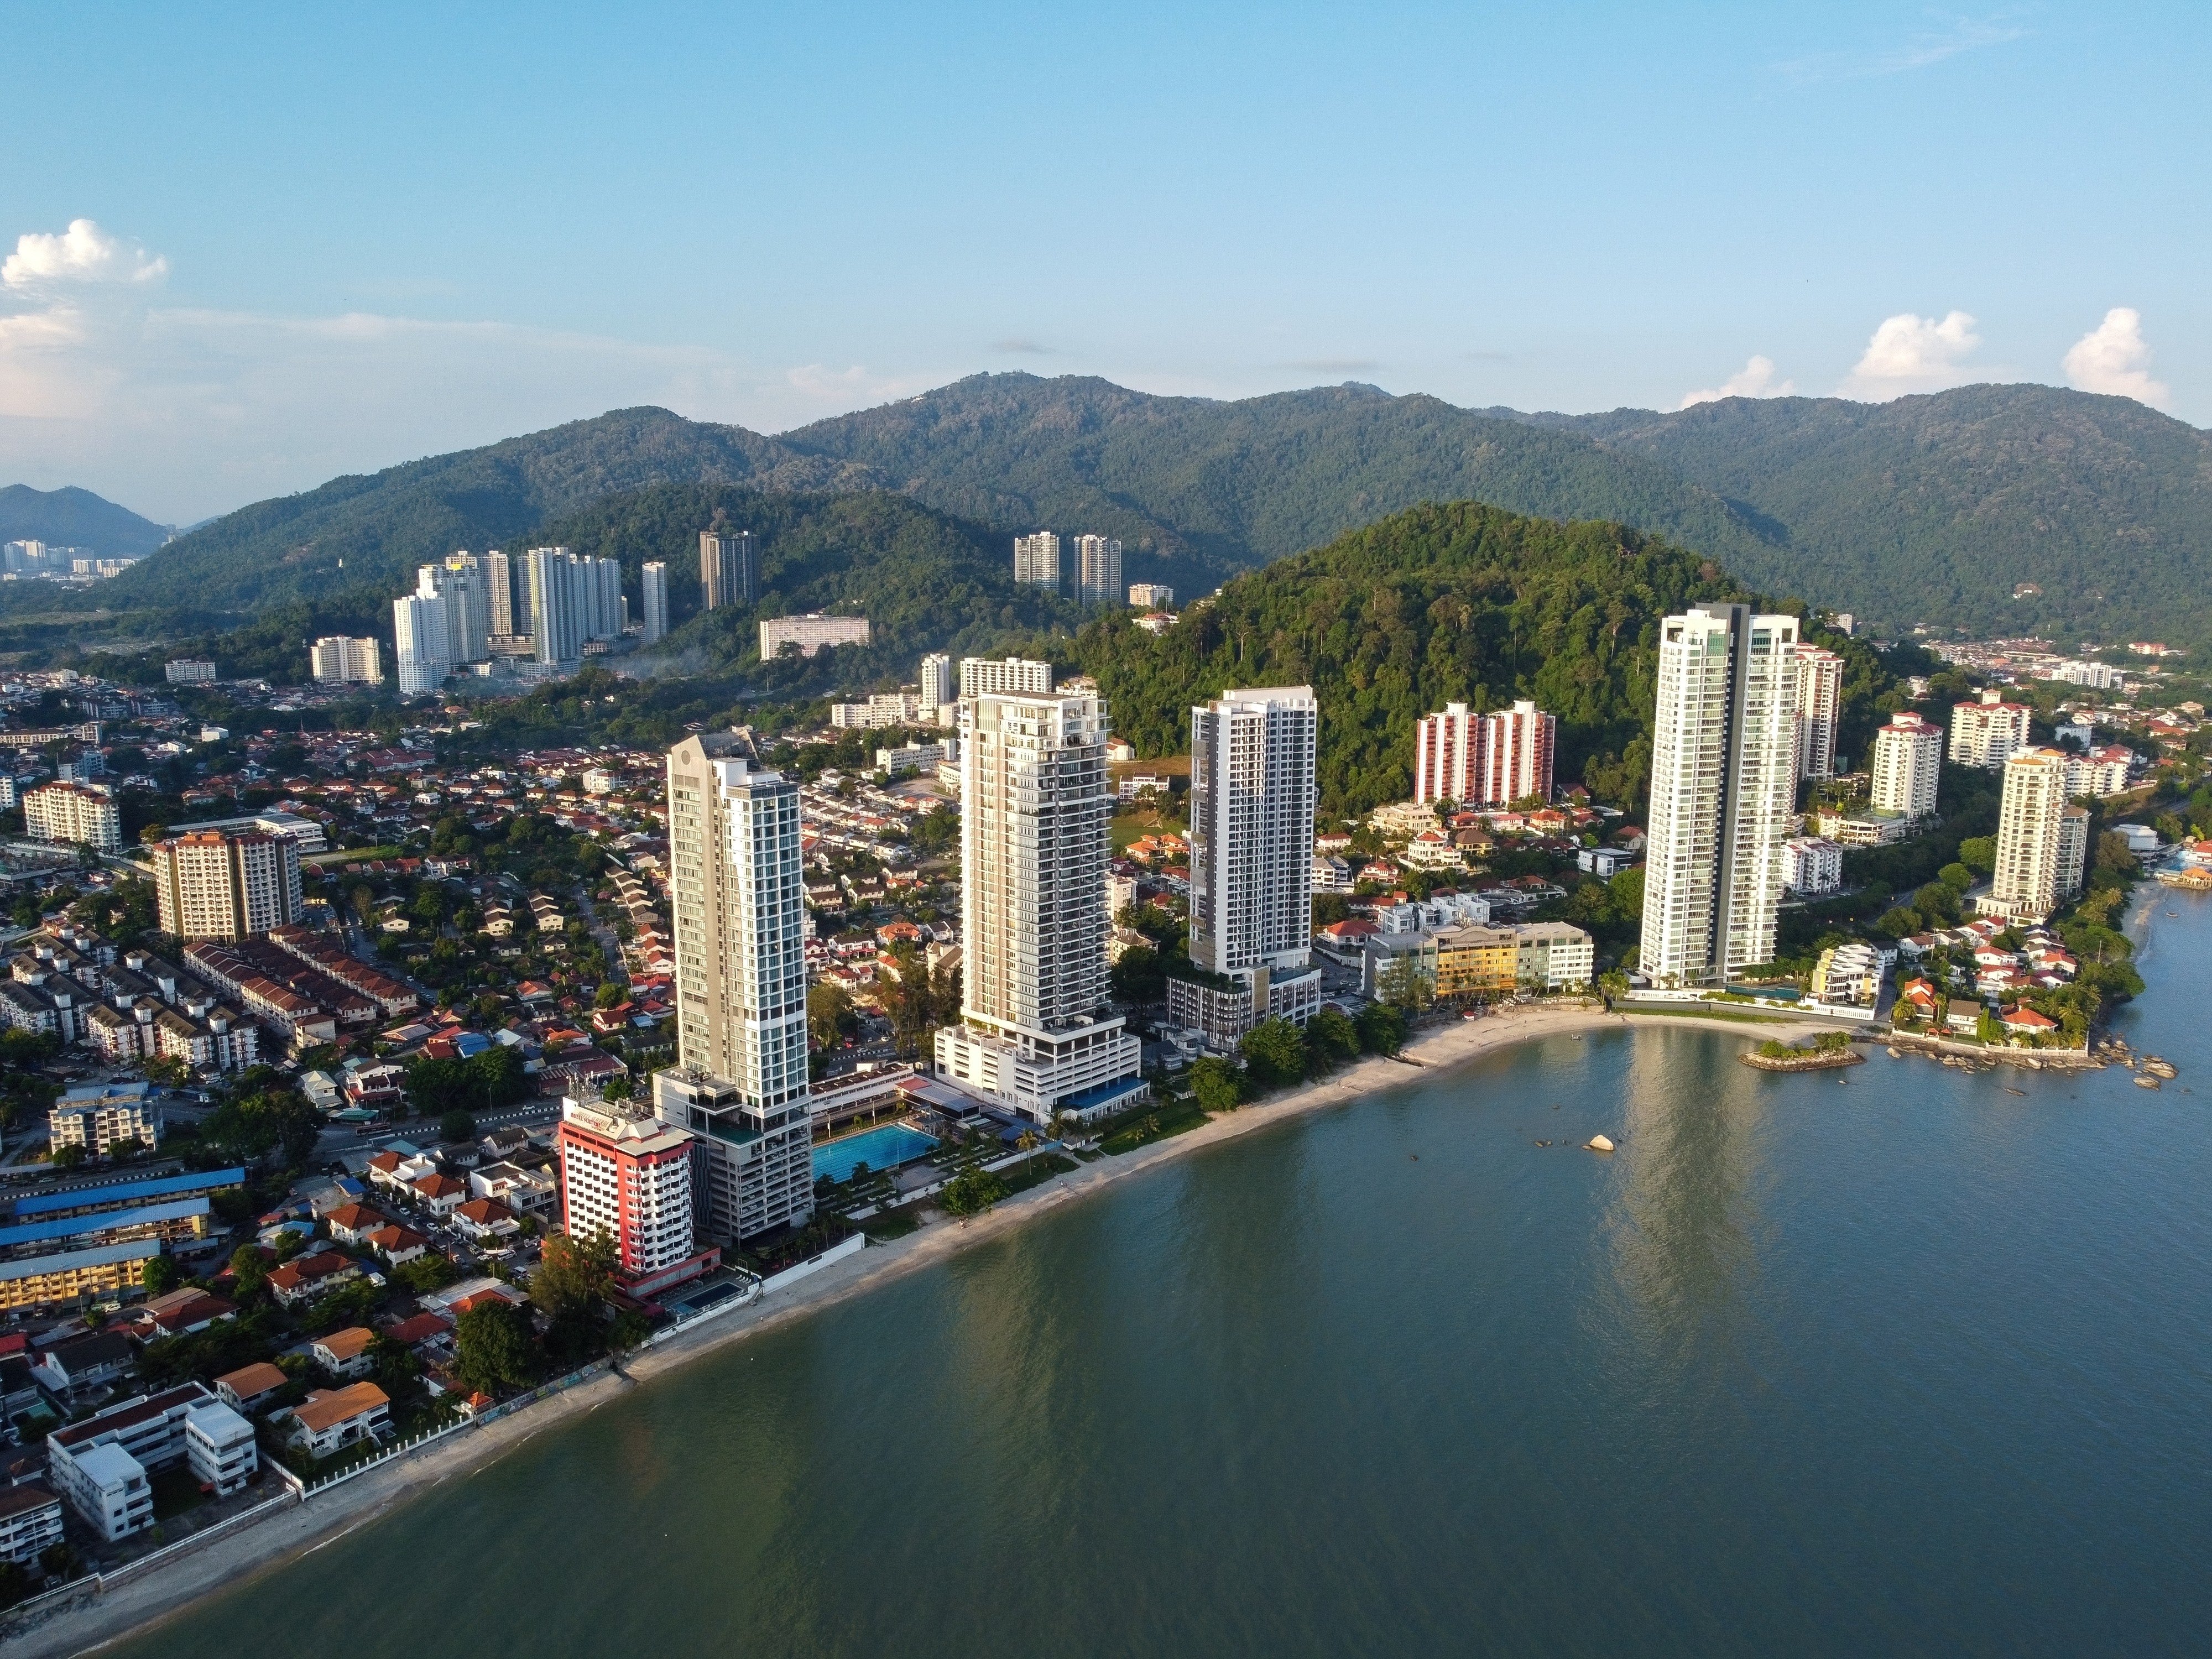 Penang is thought to be the first place in Southeast Asia to seek restrictions on certain short-term rentals. Photo: Shutterstock